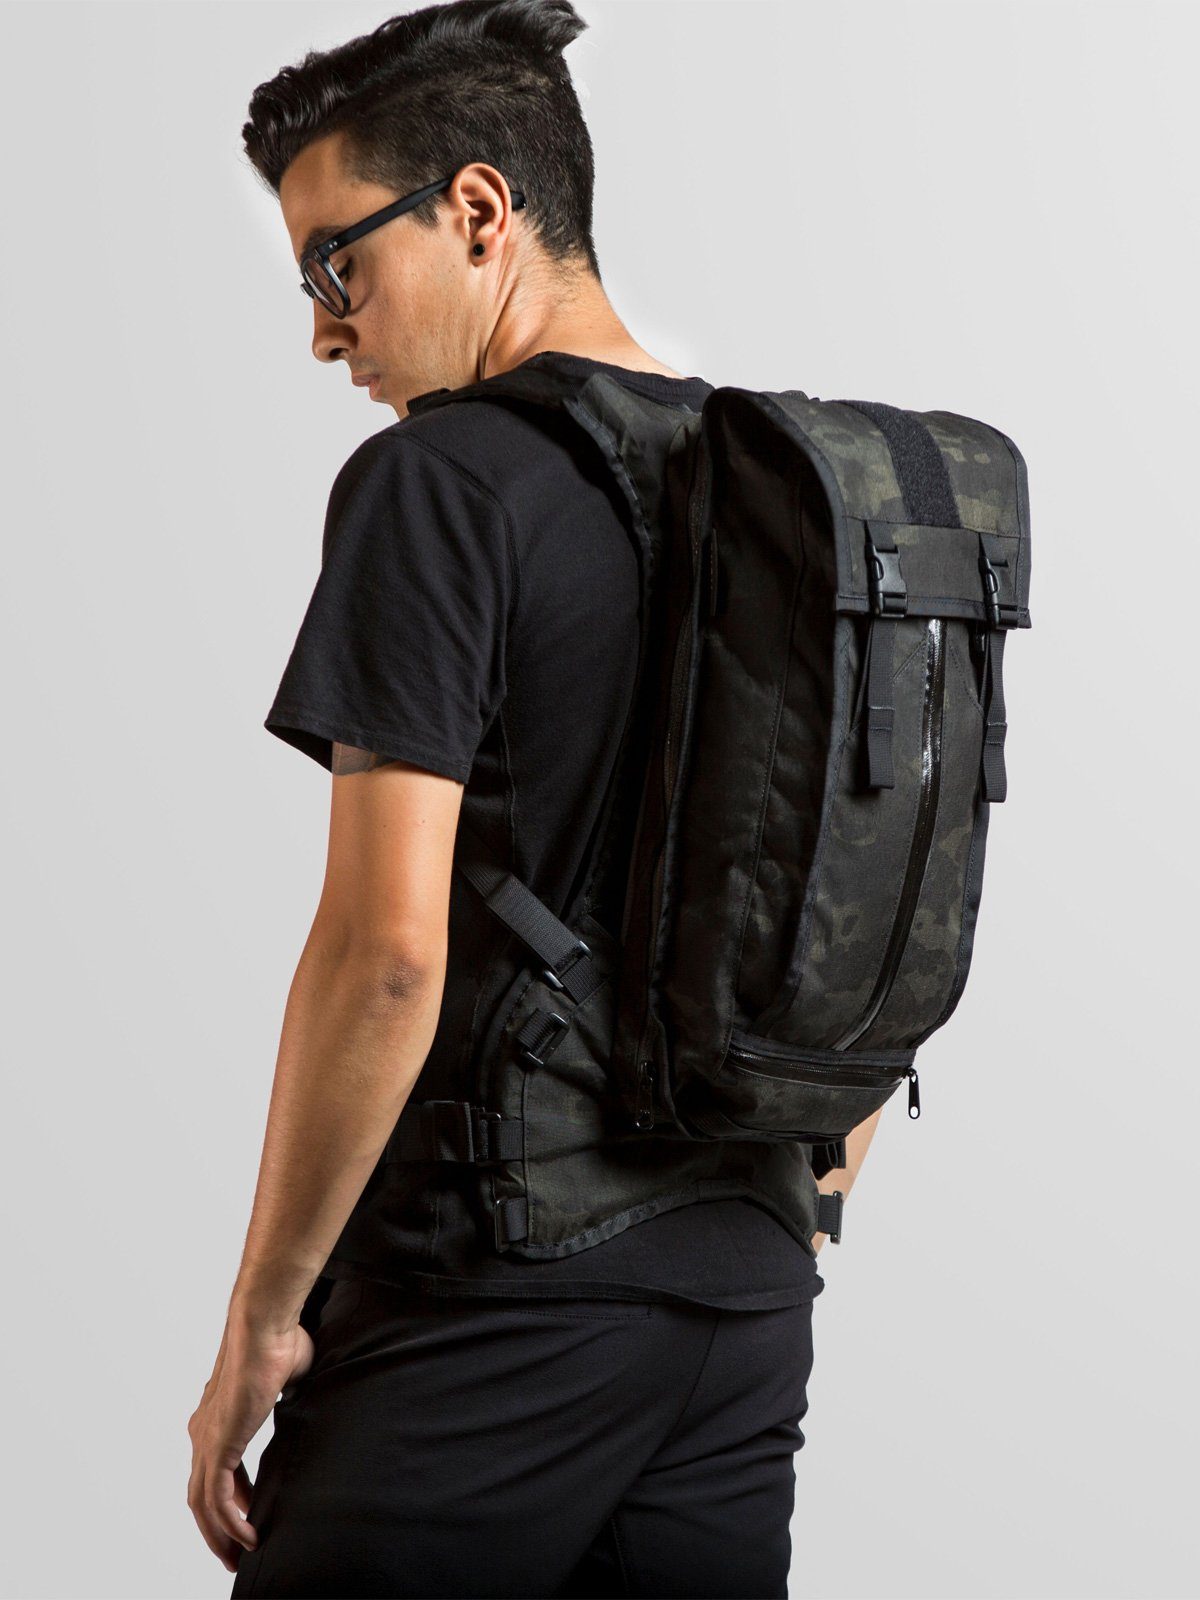 Hauser 14L by Mission Workshop - Weatherproof Bags & Technical Apparel - San Francisco & Los Angeles - Built to endure - Guaranteed forever